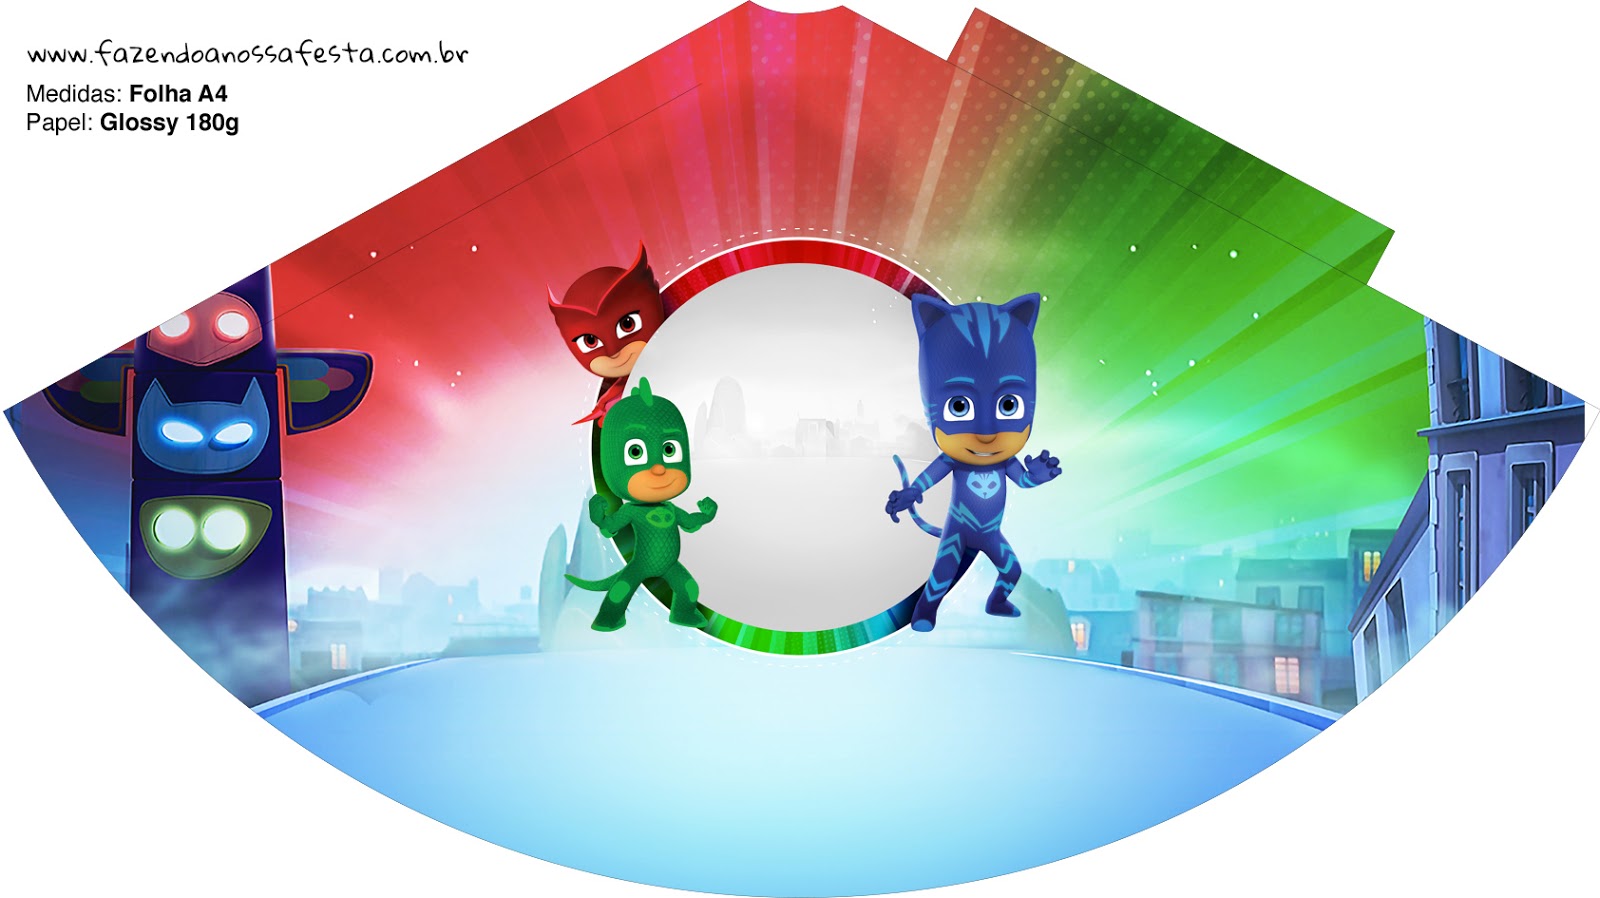 PJ Masks: Free Party Printables. | Oh My Fiesta! in english